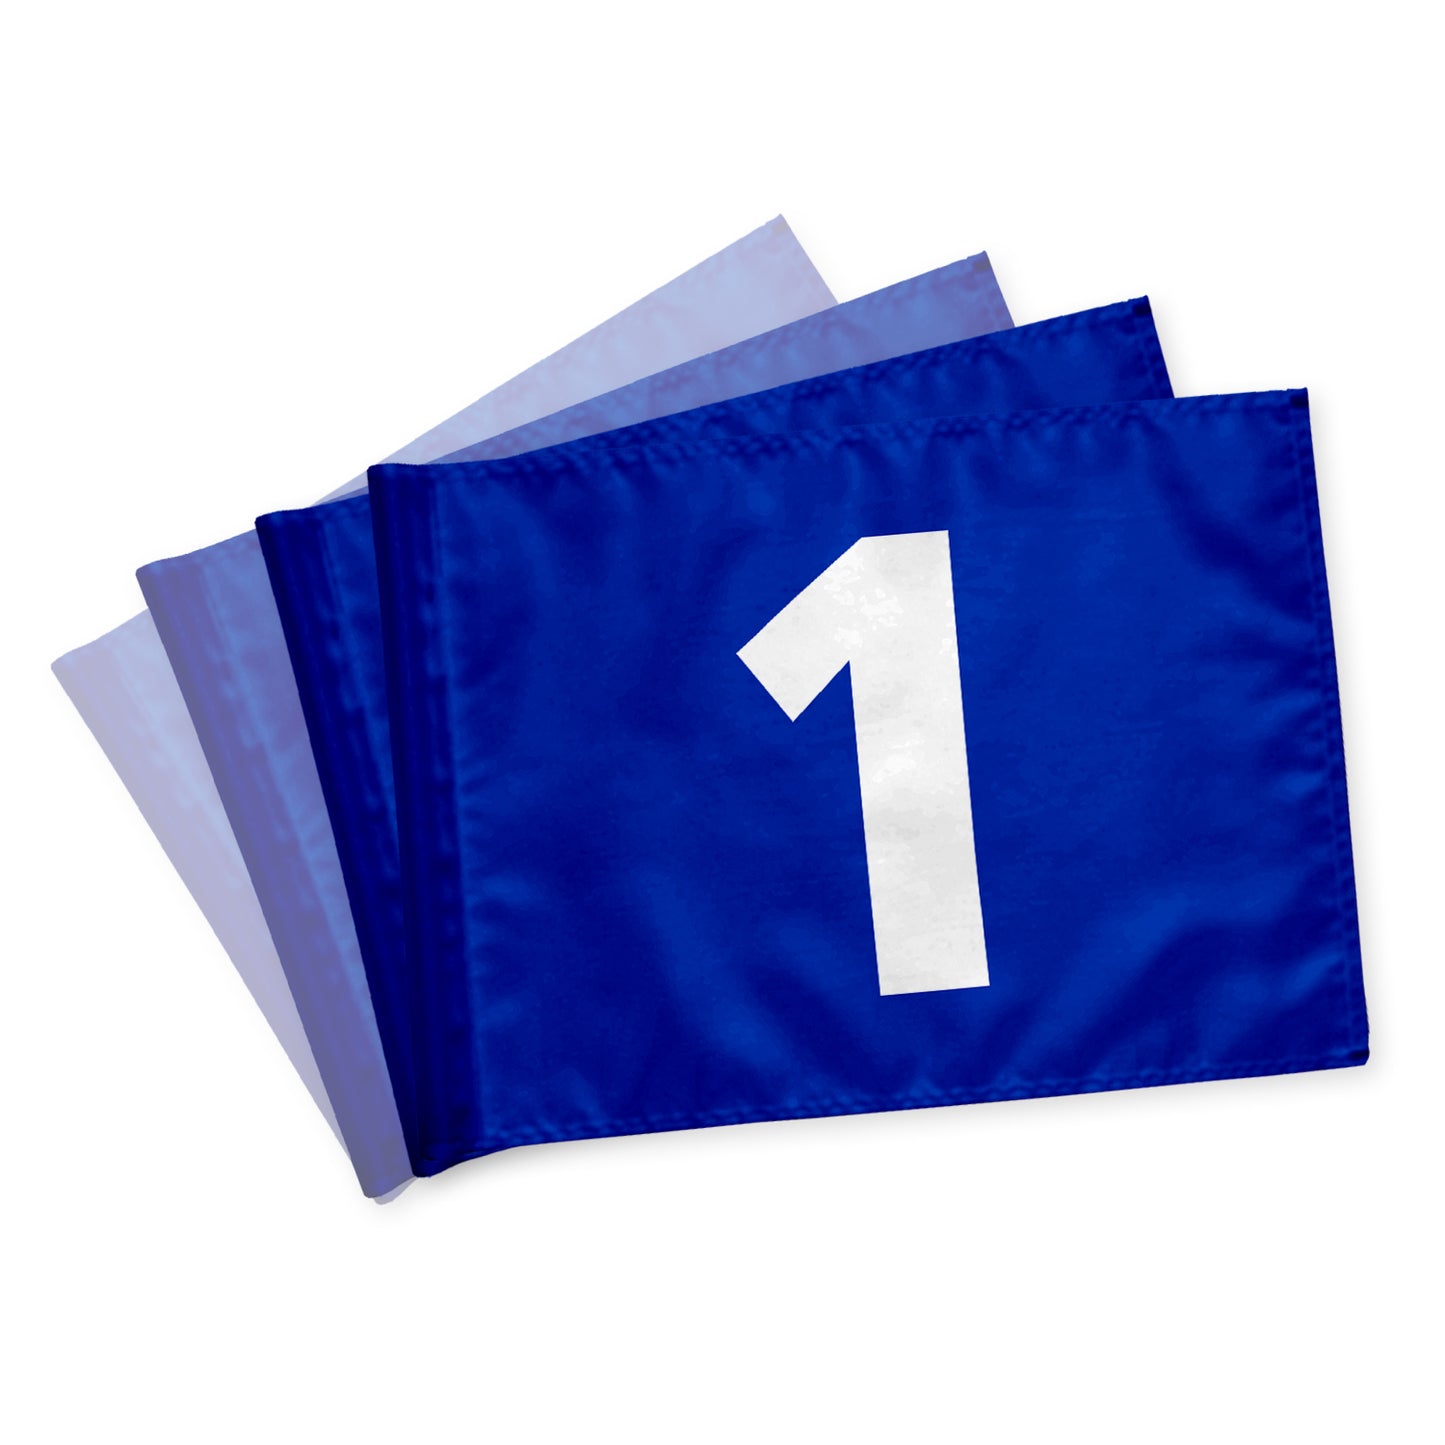 Golfflag 1-9, blue with white numbers, nylon fabric